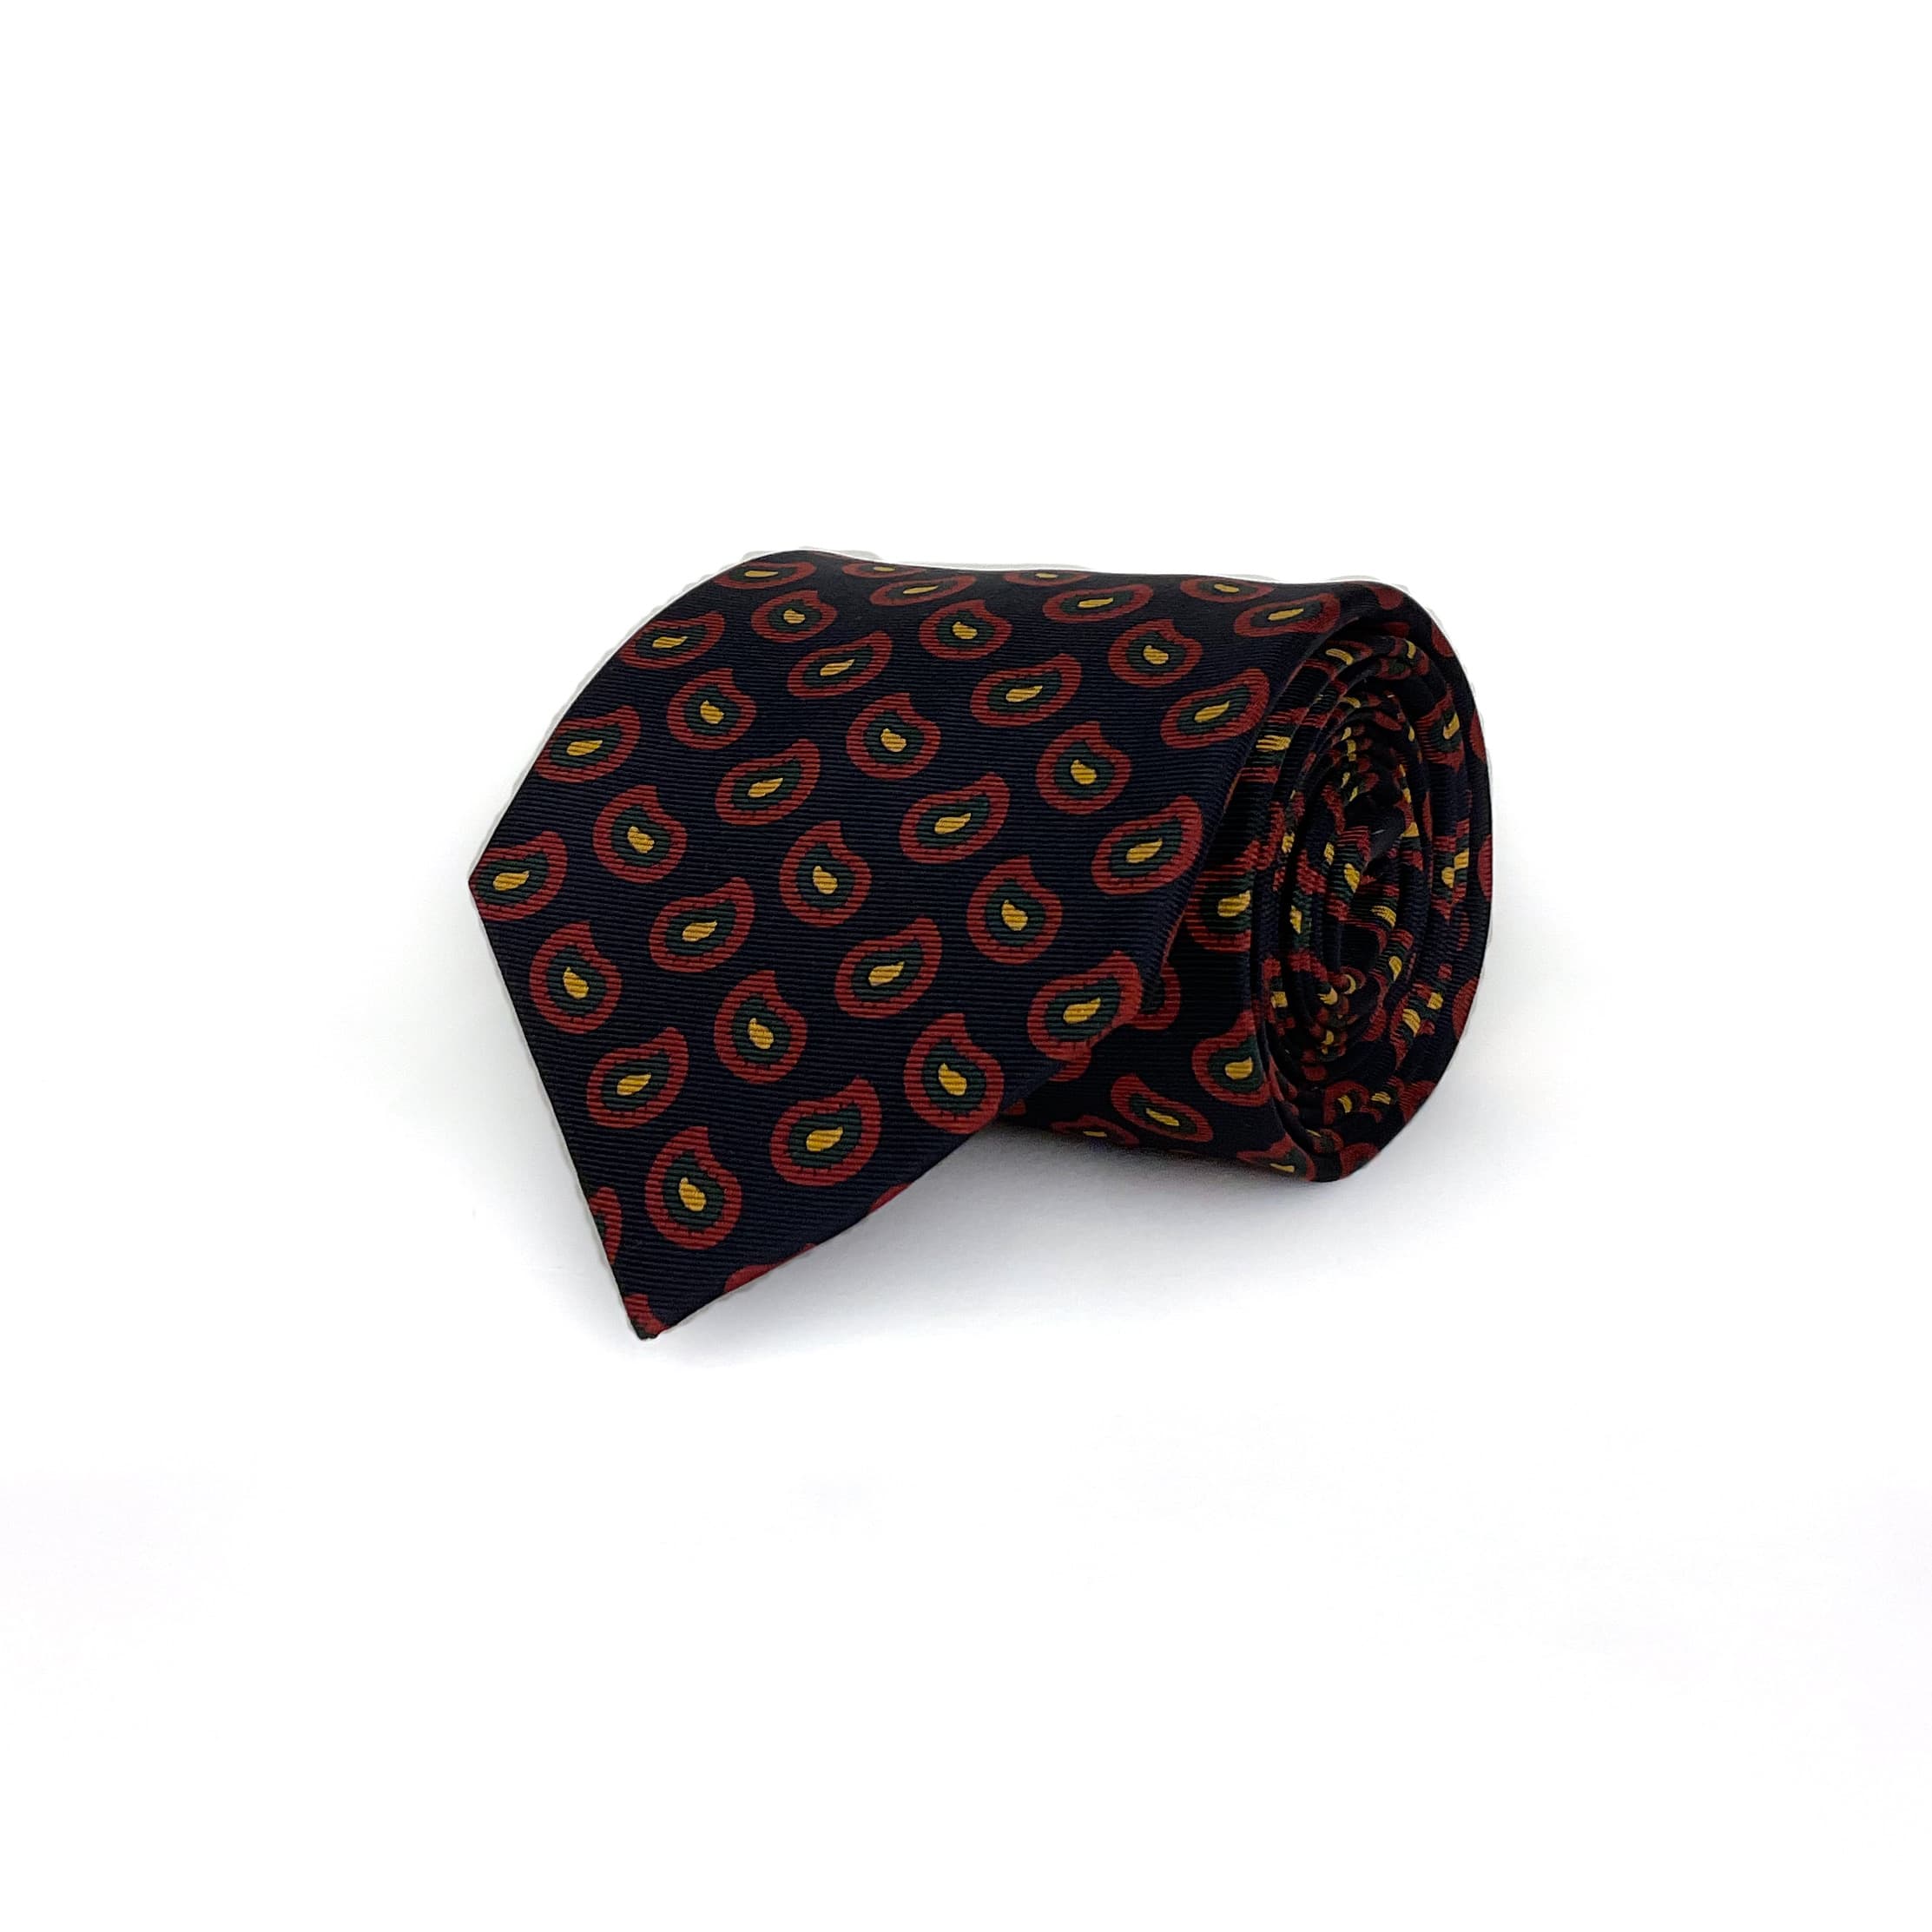 A paisley silk tie with a black base and red and yellow motifs  that is rolled and placed on a white background.